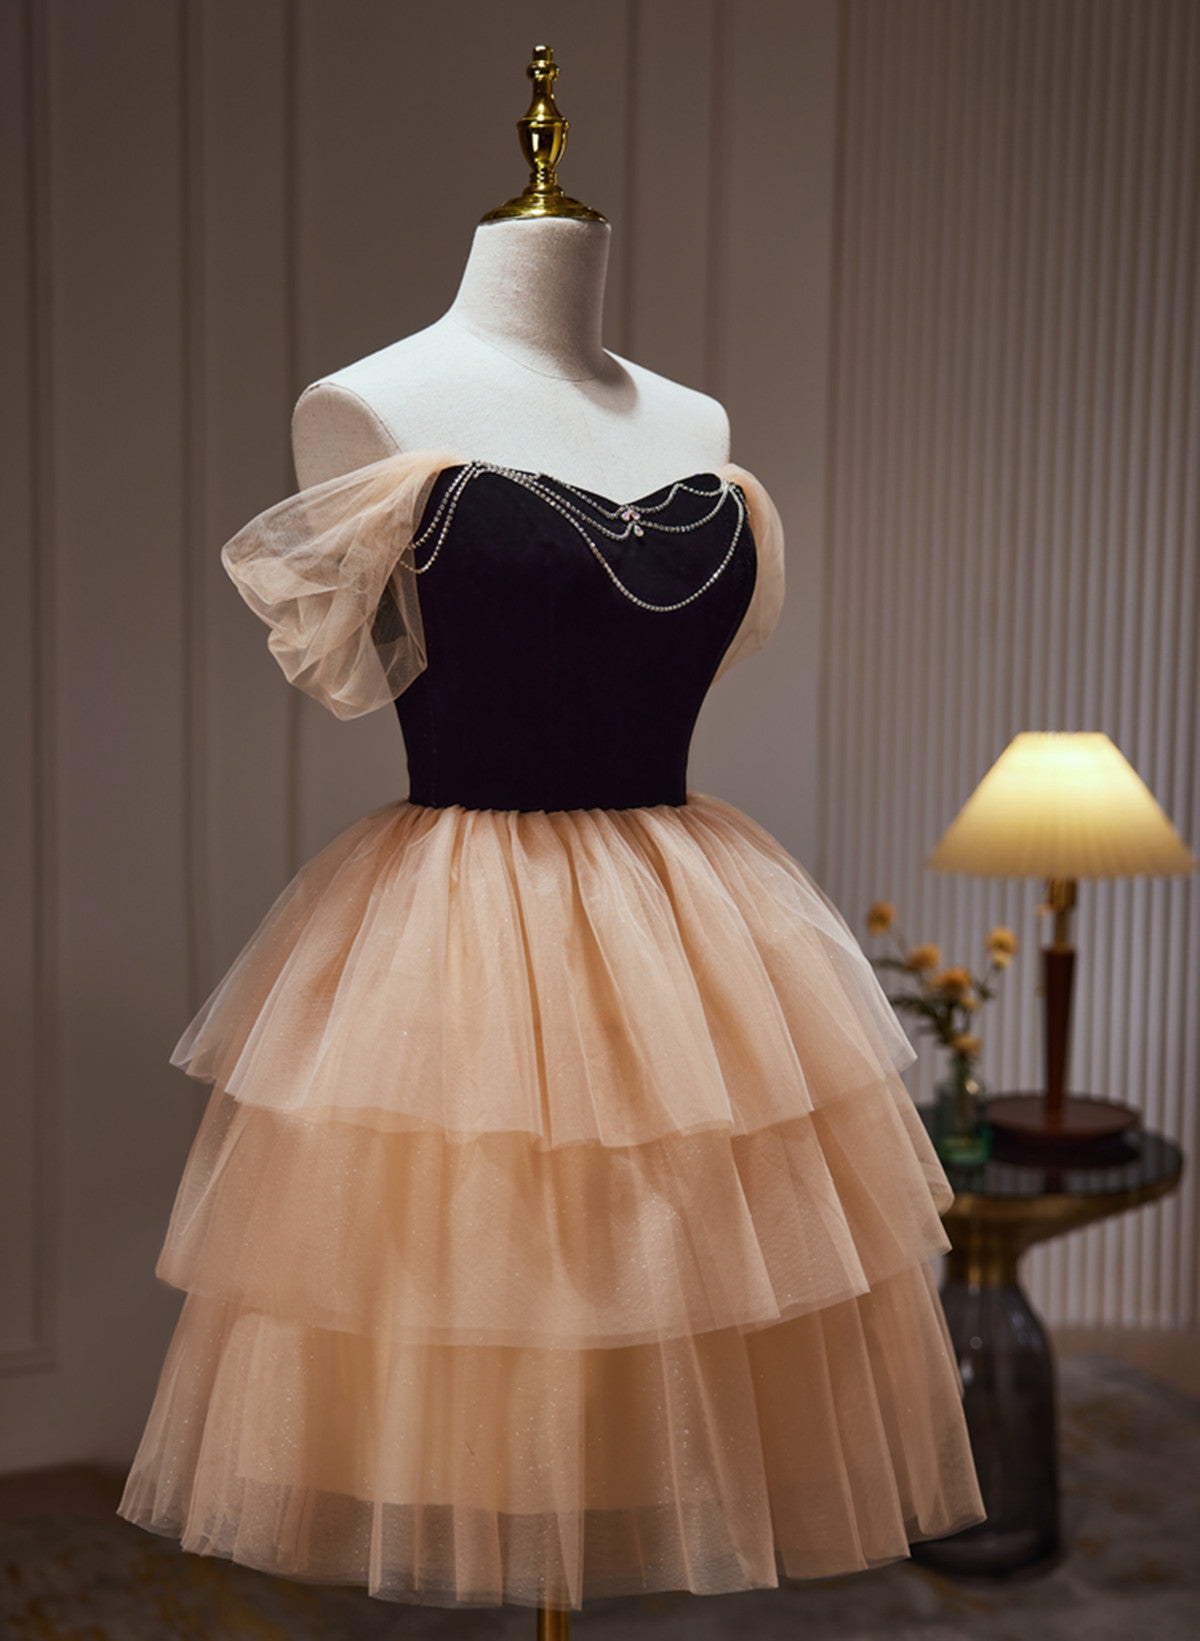 Bridesmaid Dresses Fall Colors, Champagne and Black Sweetheart Short Formal Dress, Tulle Homecoming Dress